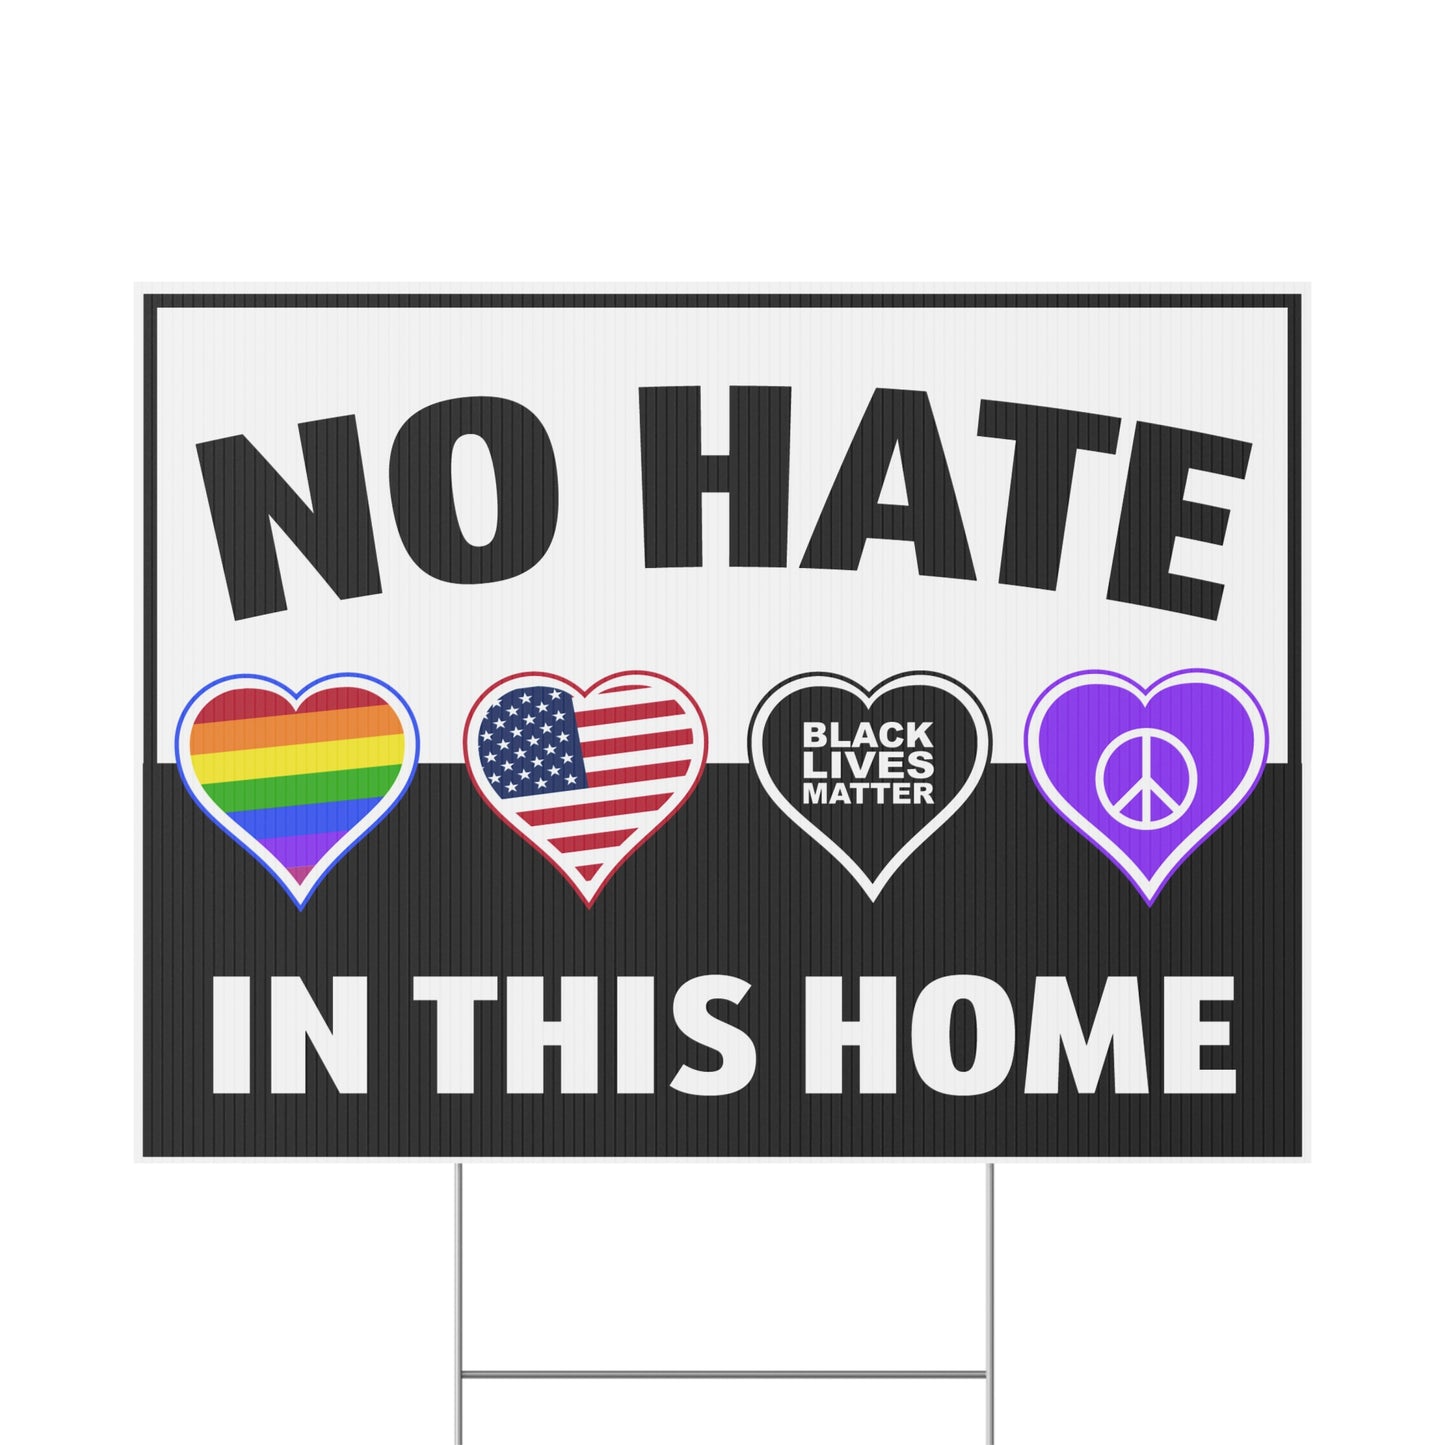 No Hate in This Home, Hate Has no Home Here, Yard Sign, Printed 2-Sided, 12x18, 24x18 or 36x24, Metal H-Stake Included, v1